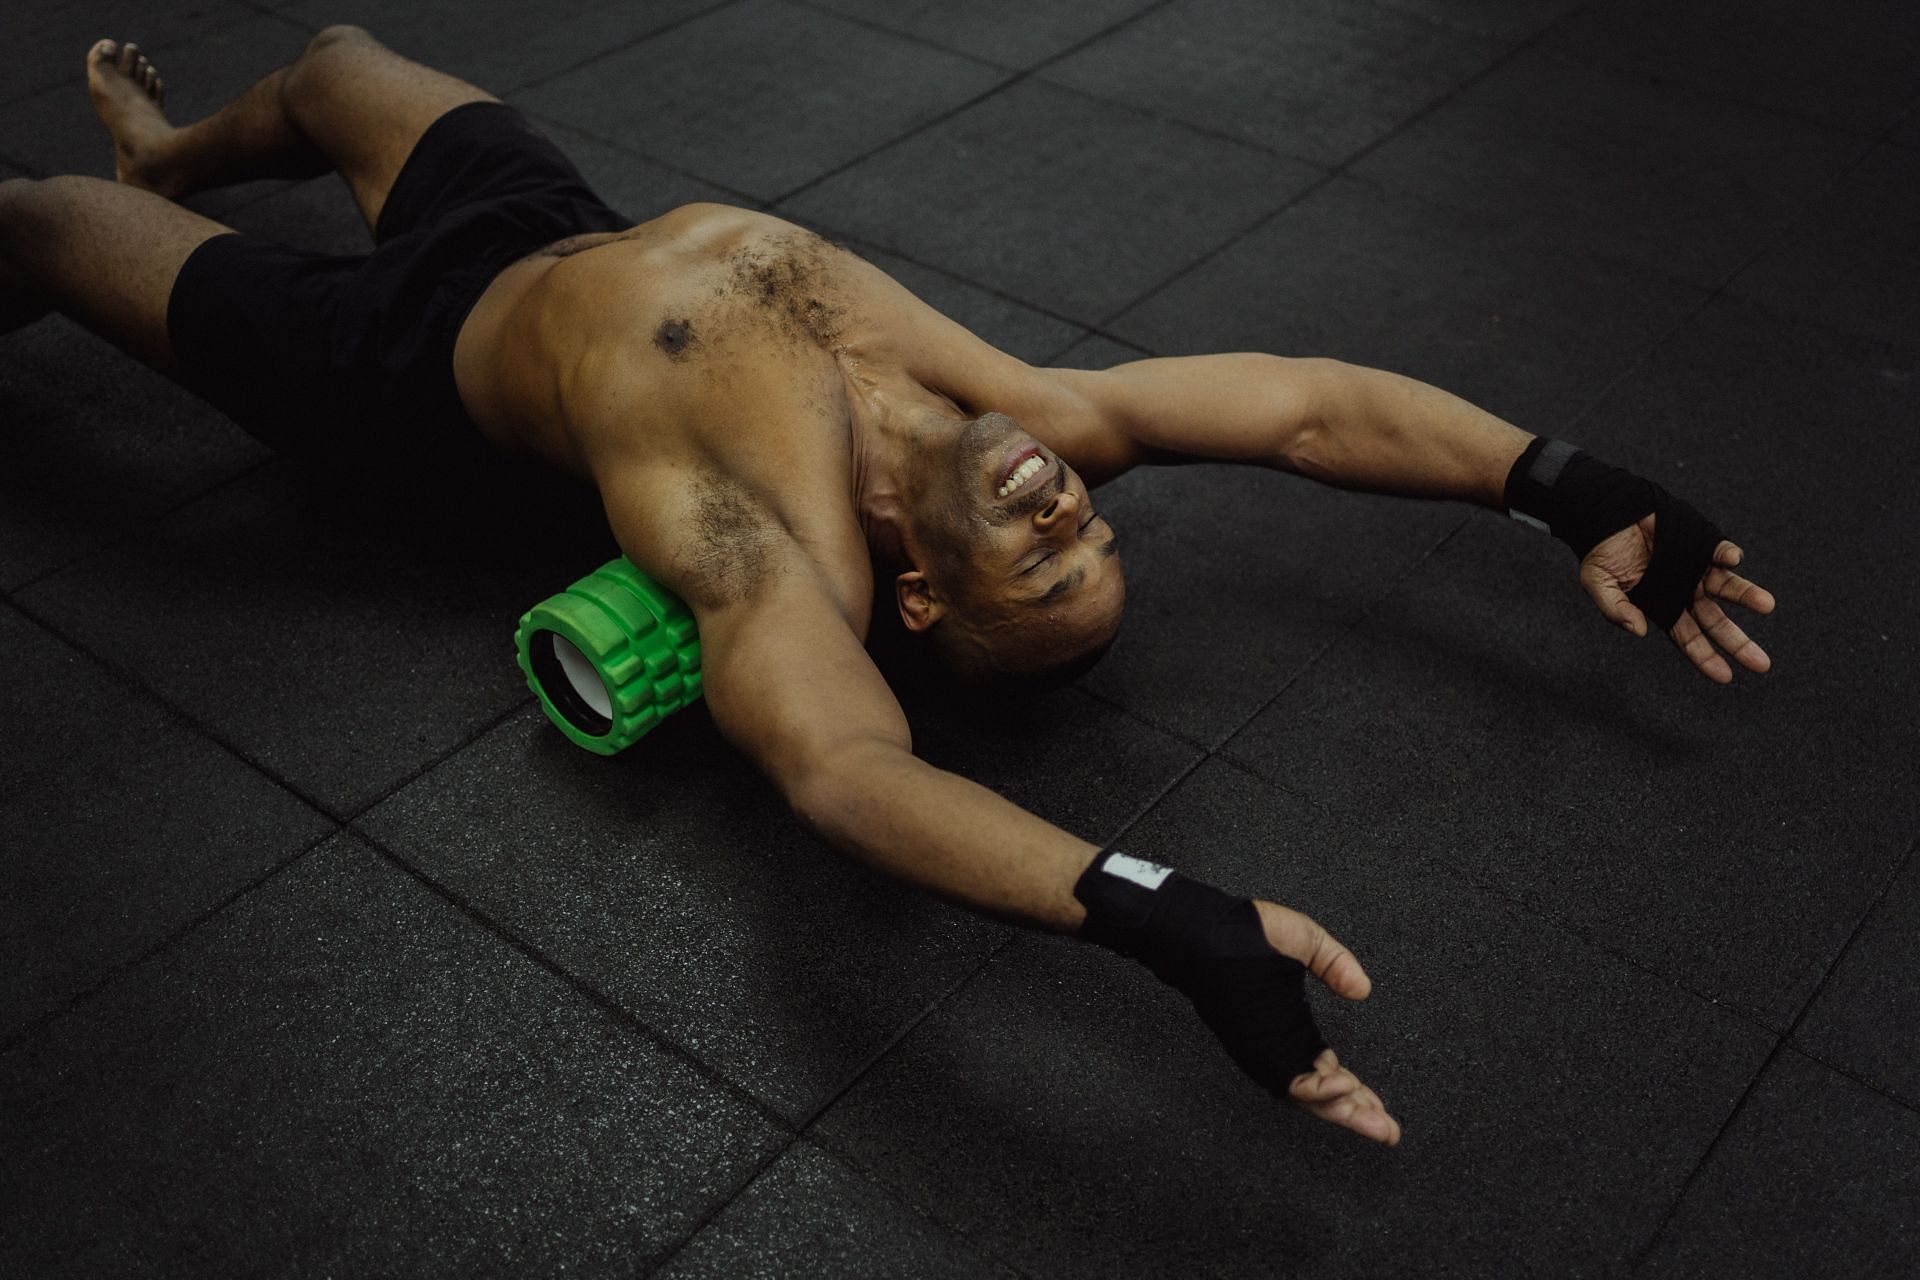 Foam rolling is a self-myofascial release (SMR) technique that involves using a foam roller to apply pressure to specific muscle groups. (Photo by Ketut Subiyanto/pexels)